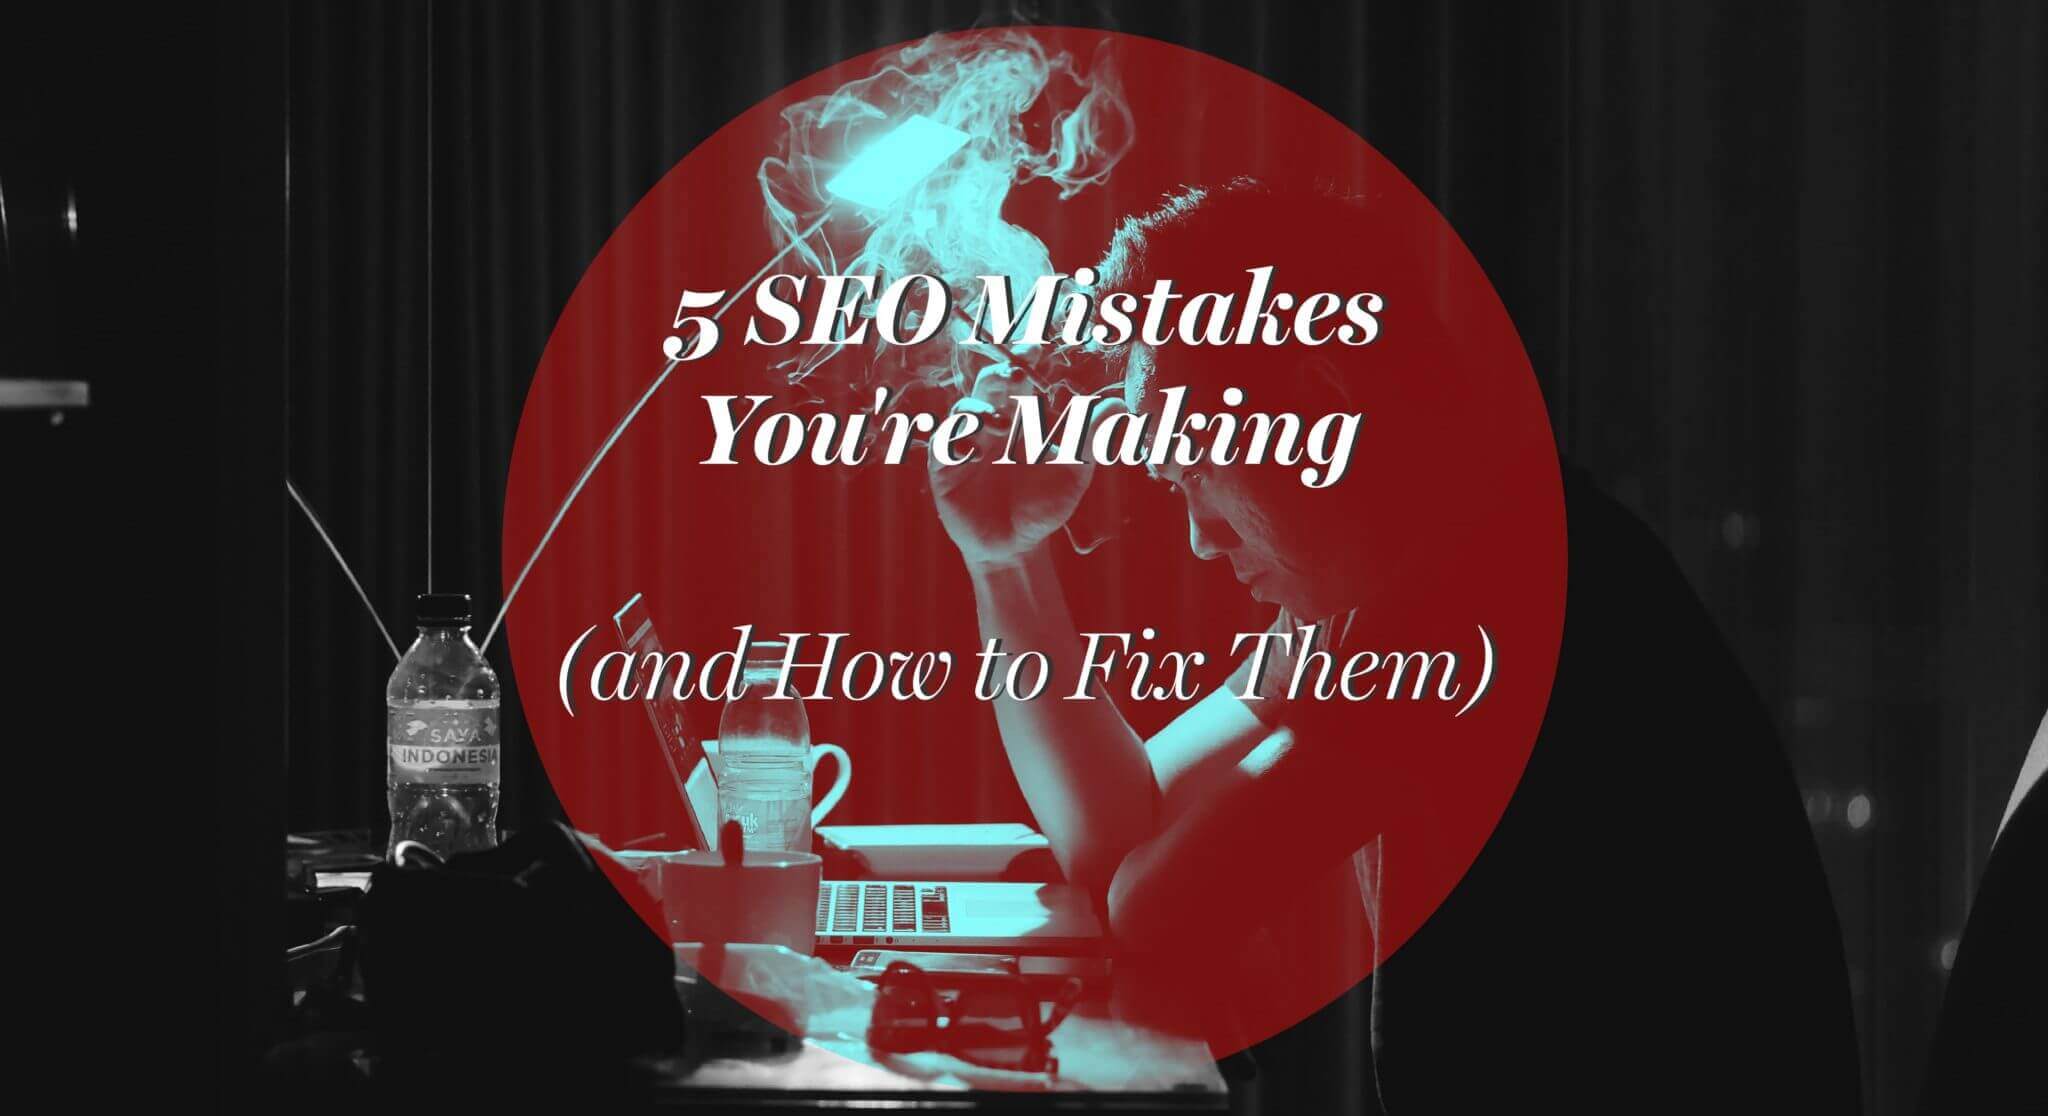 5 SEO Mistakes You're Making (and How to Fix Them)